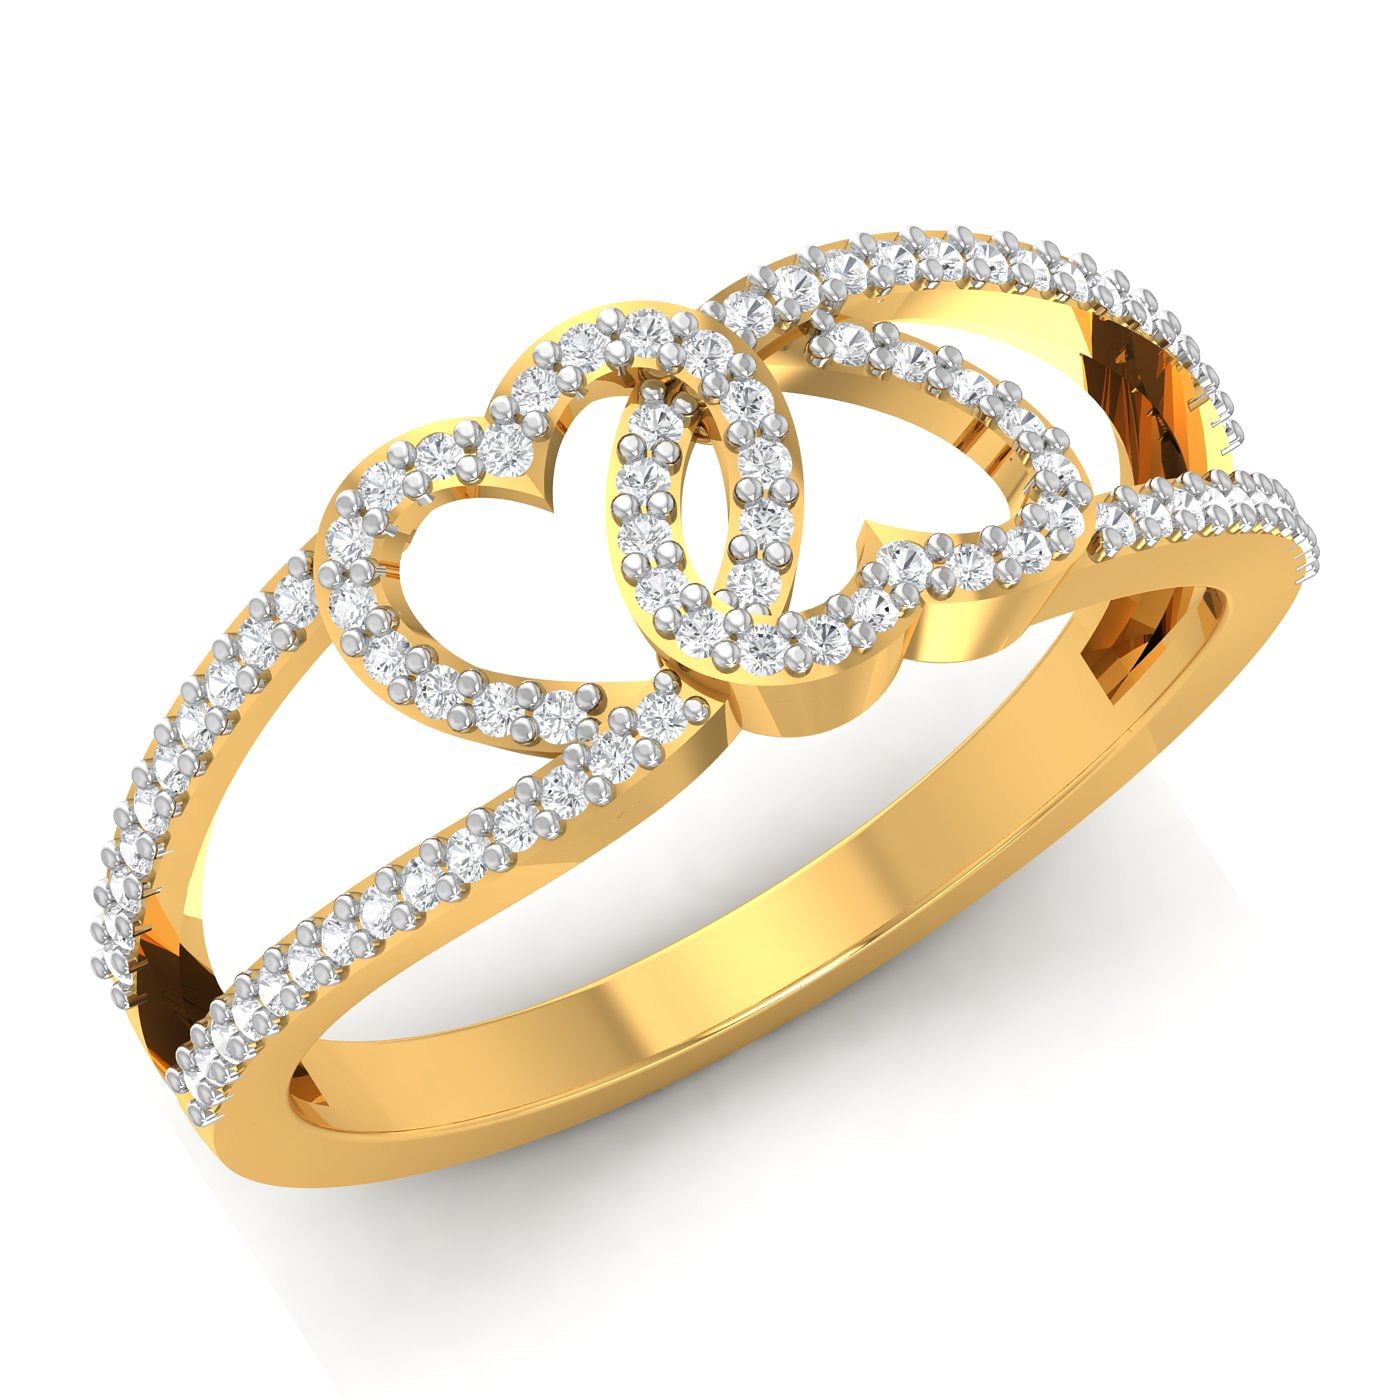 Merge Heart Wedding Ring With Yellow Gold Metal